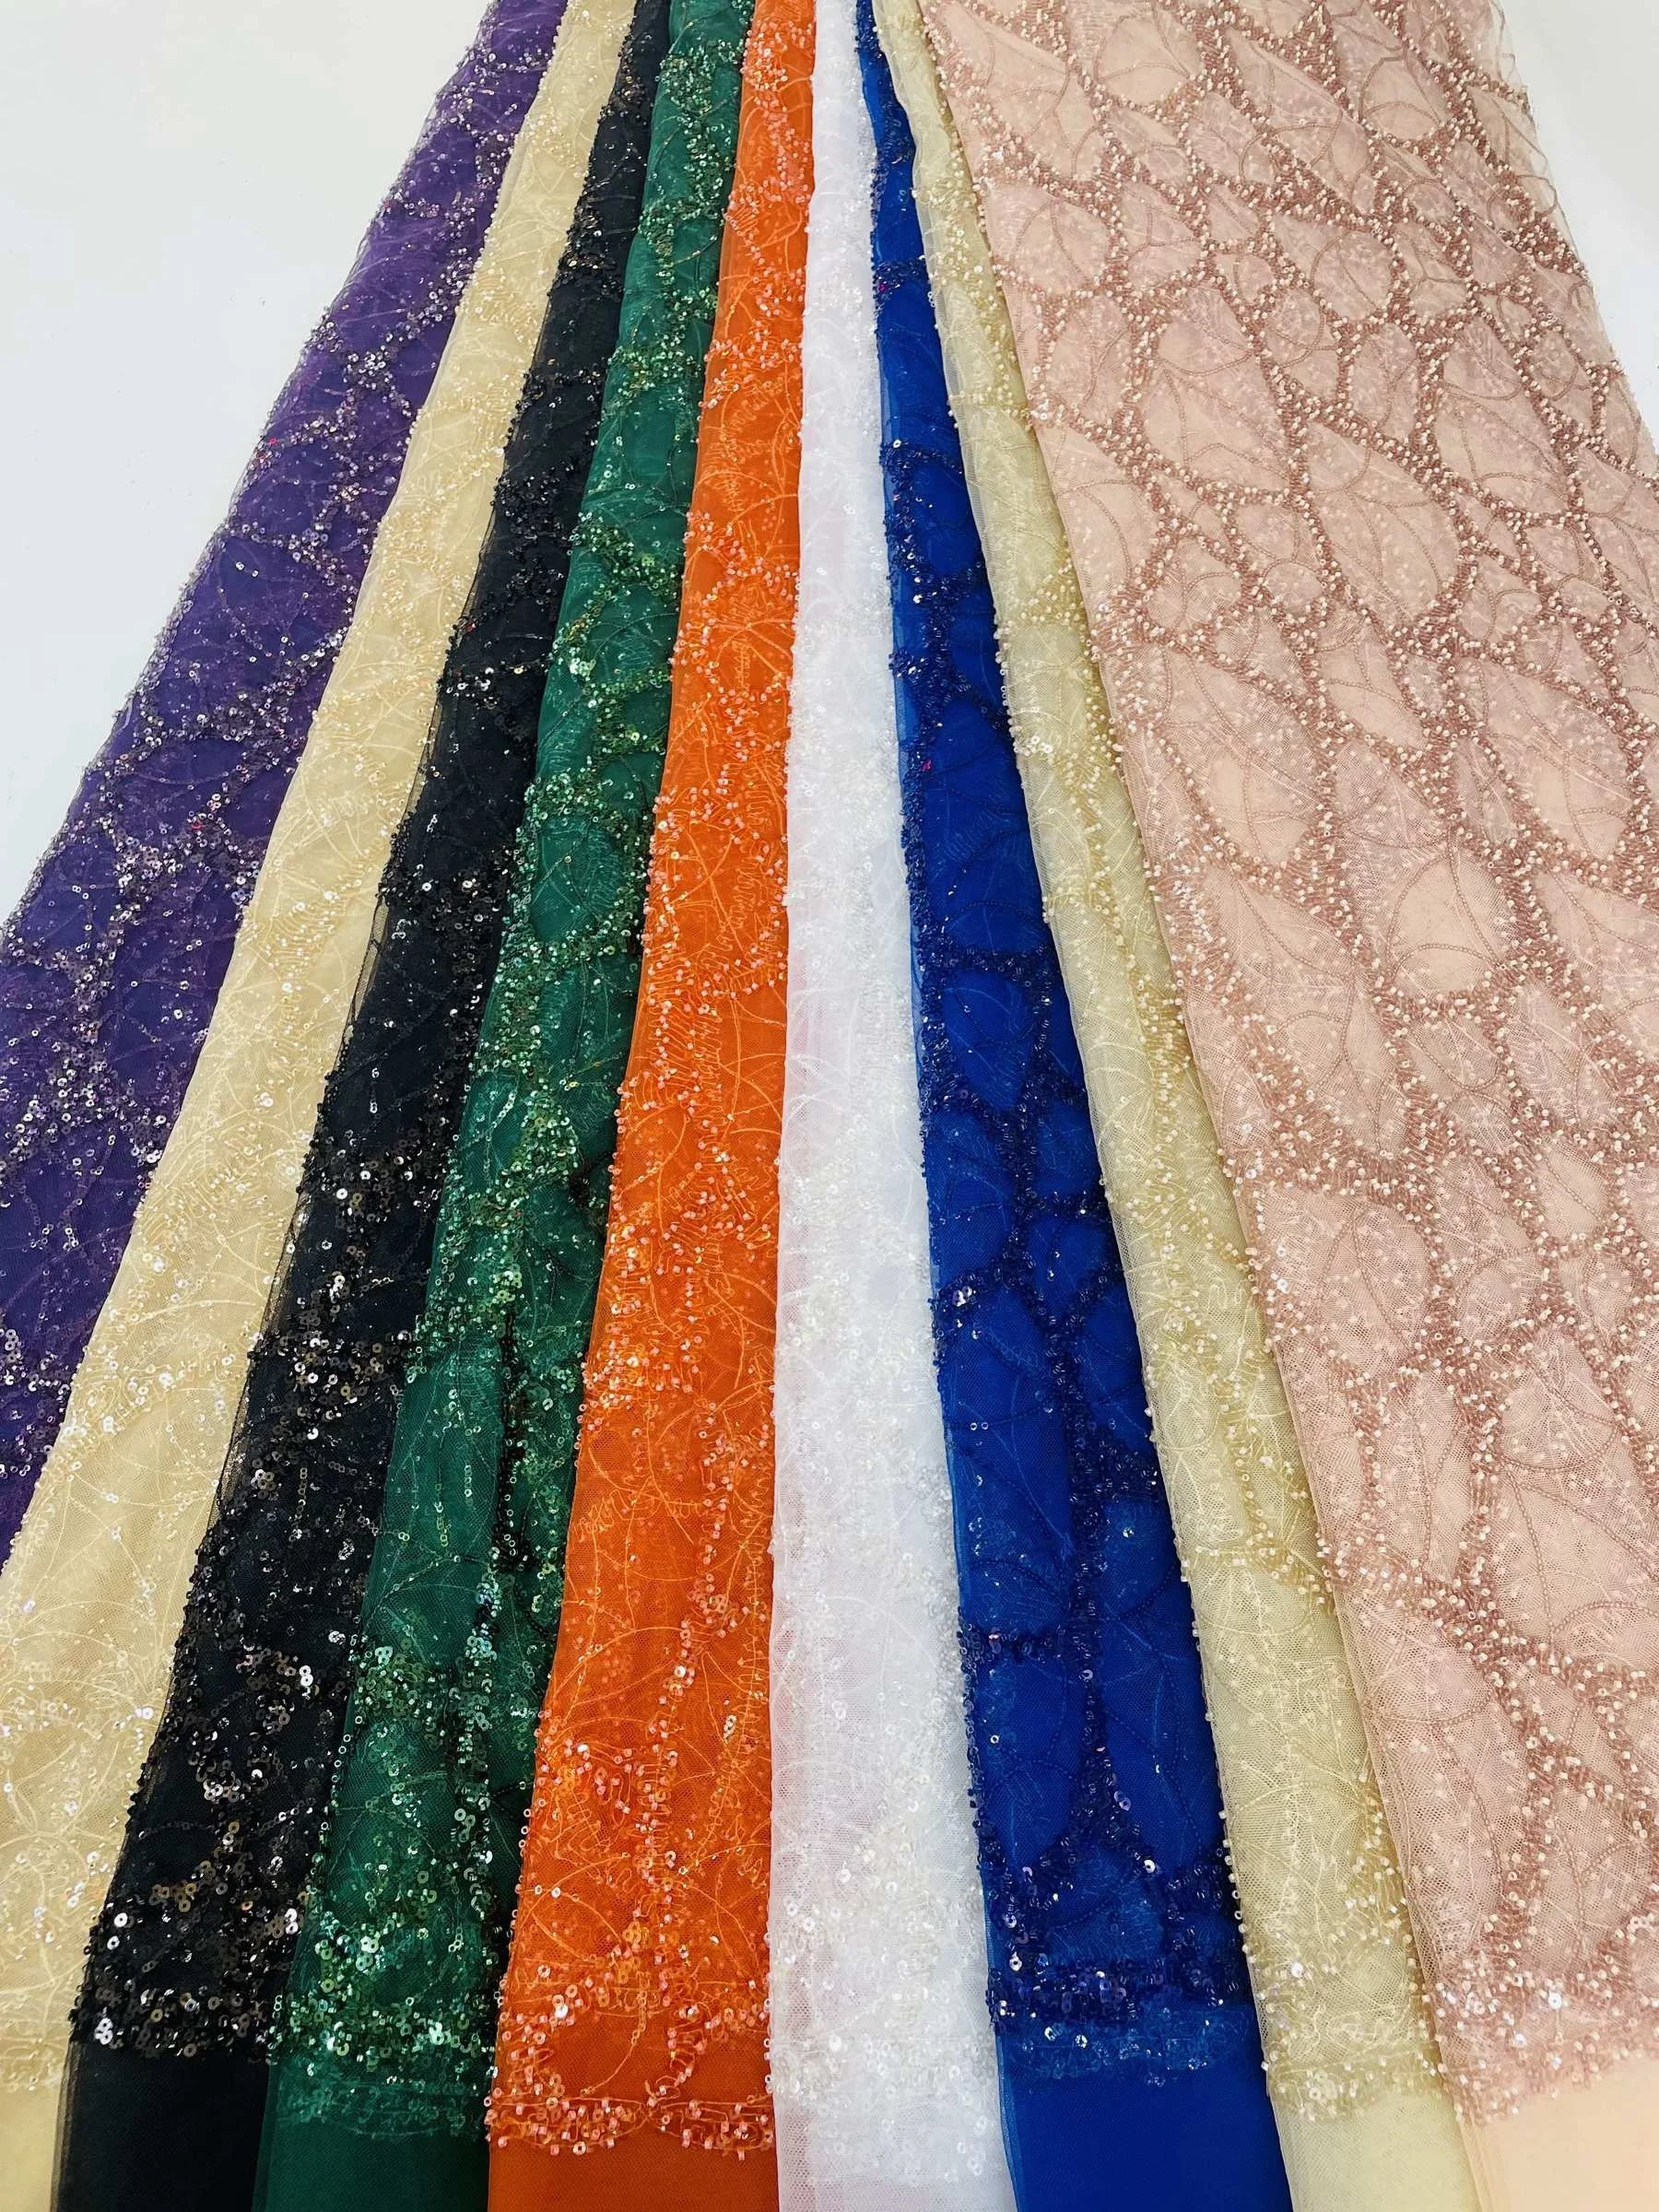 Luxury African Heavy bead Lace Fabric New High Quality 5 Yards Nigerian Sequins French Tulle Fabric Material For Wedding Party